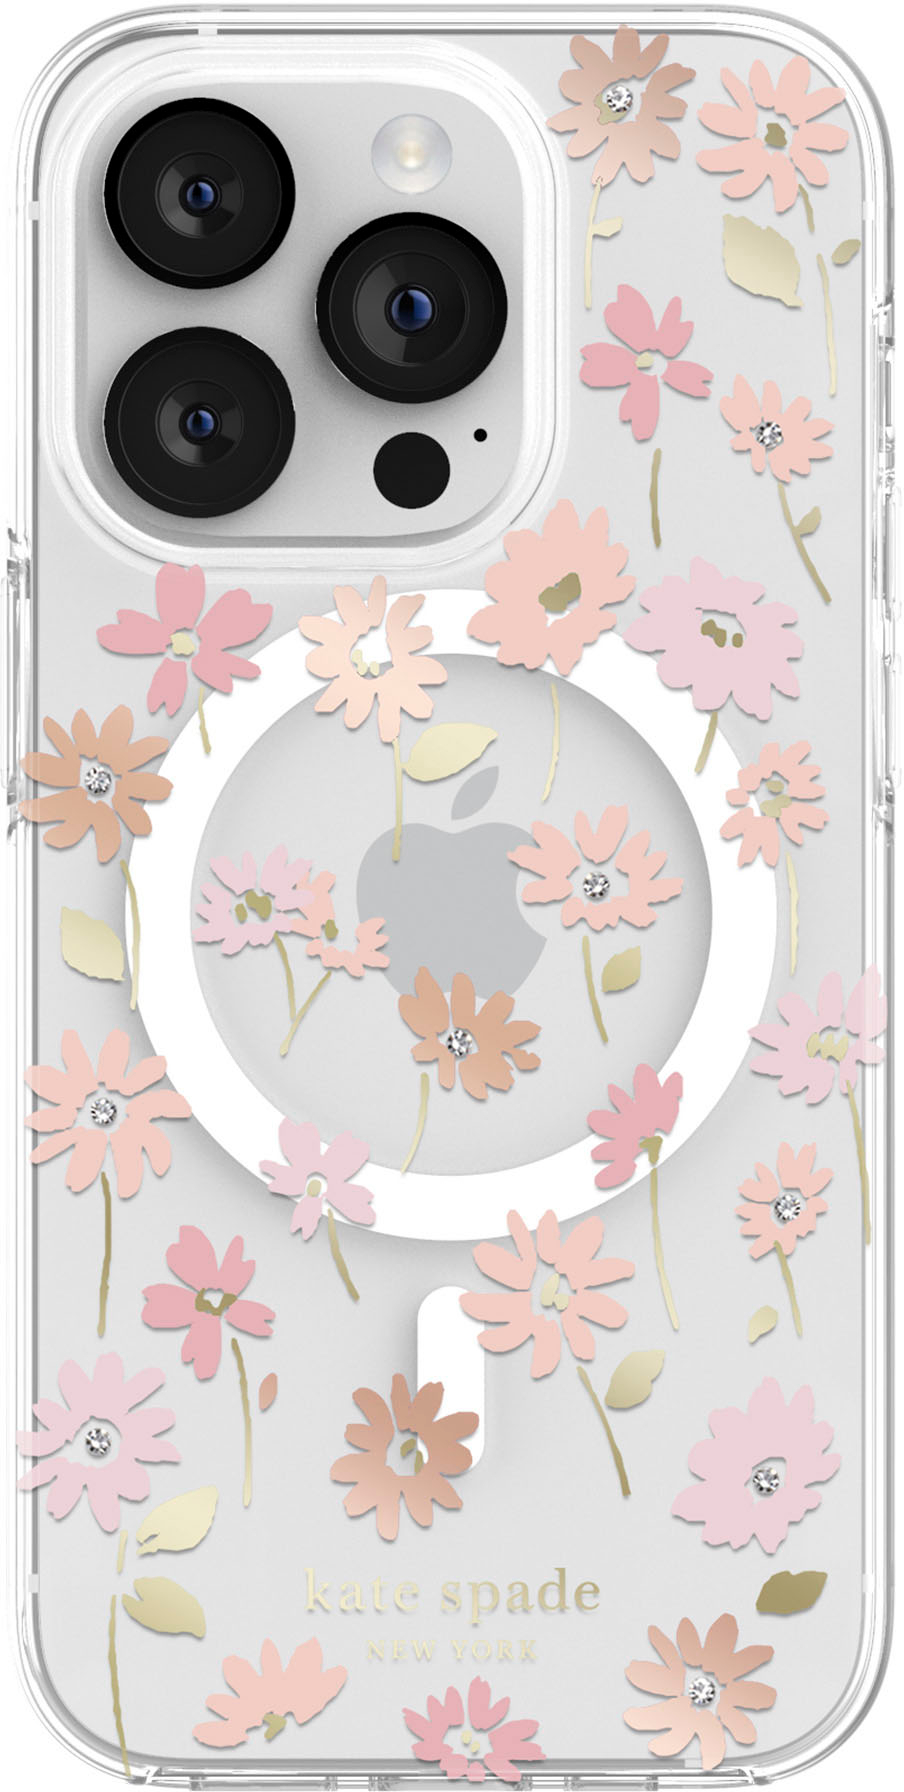 Kate Spade New York - Protective Hardshell MagSafe Case for iPhone 14 Pro - Flowerbed Multi